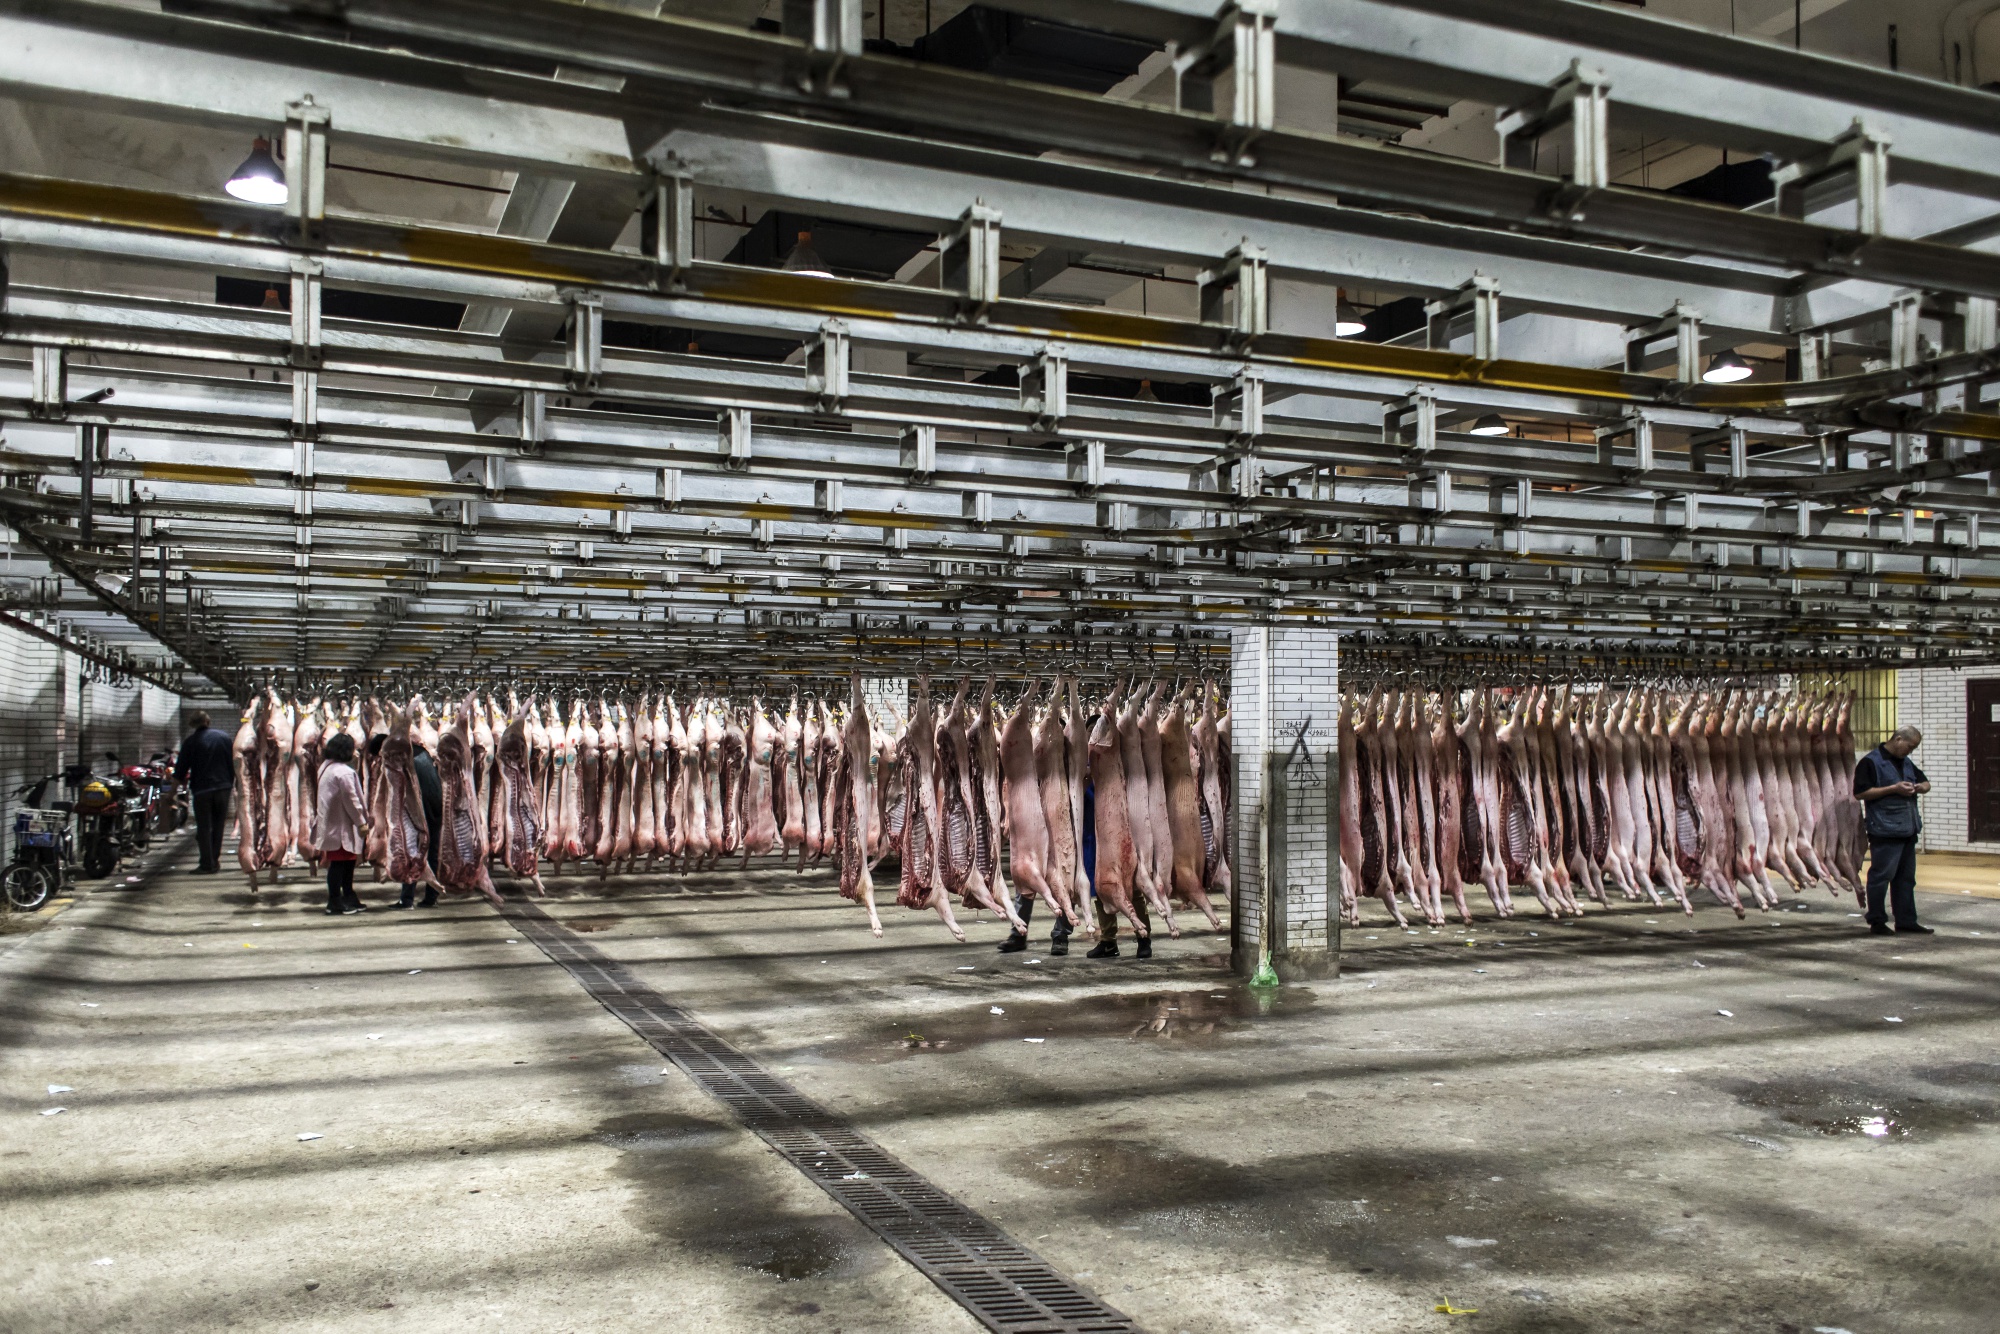 Pig carcasses hang from a conveyor at a pork wholesale market on the outskirts of Shanghai, China.